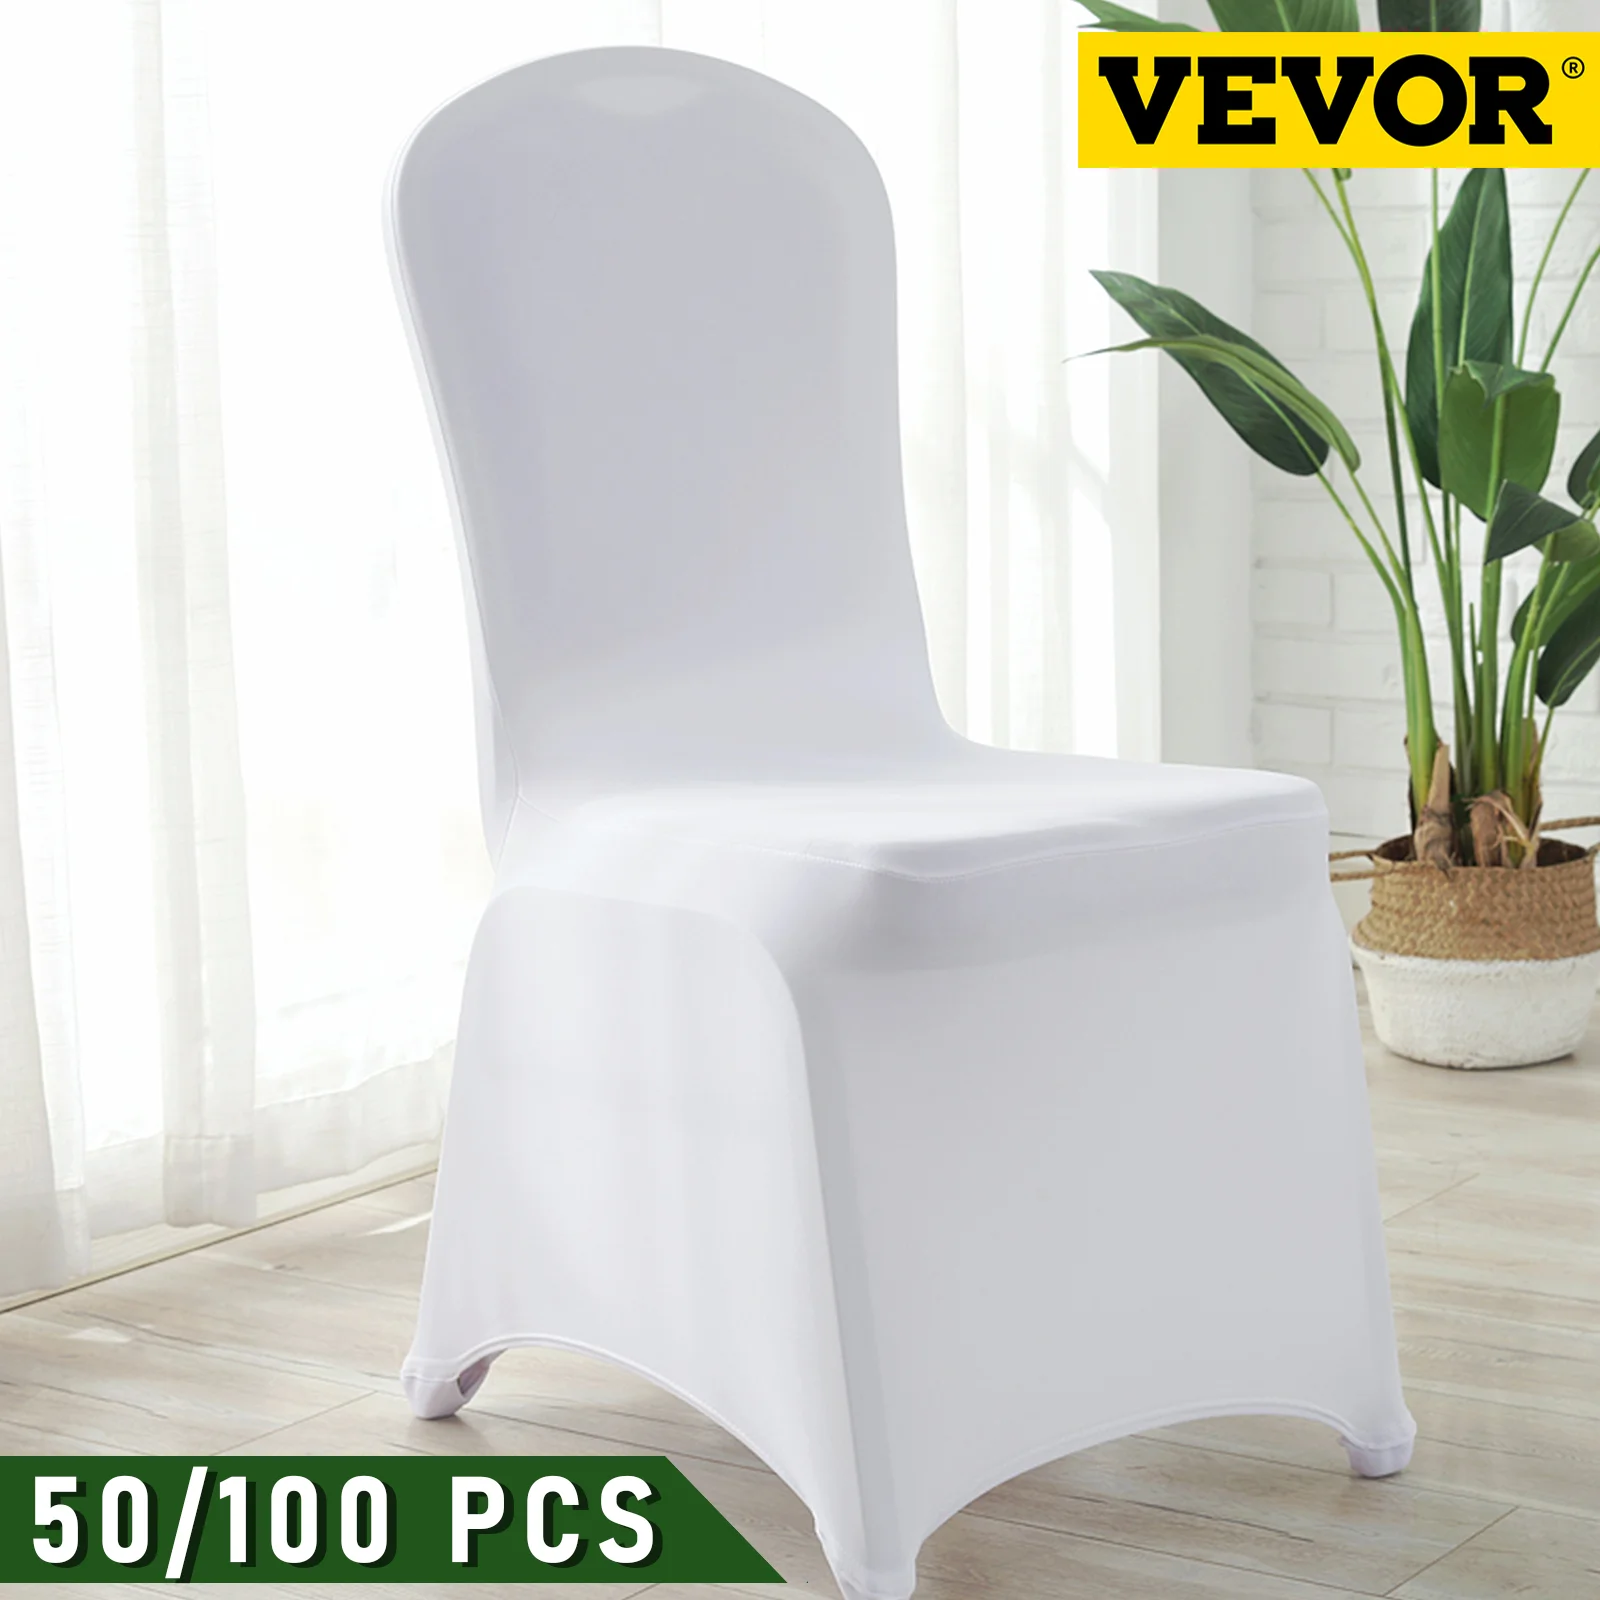 50 PREMIUM SPANDEX BANQUET CHAIR COVERS WEDDING ARCH FRONT 